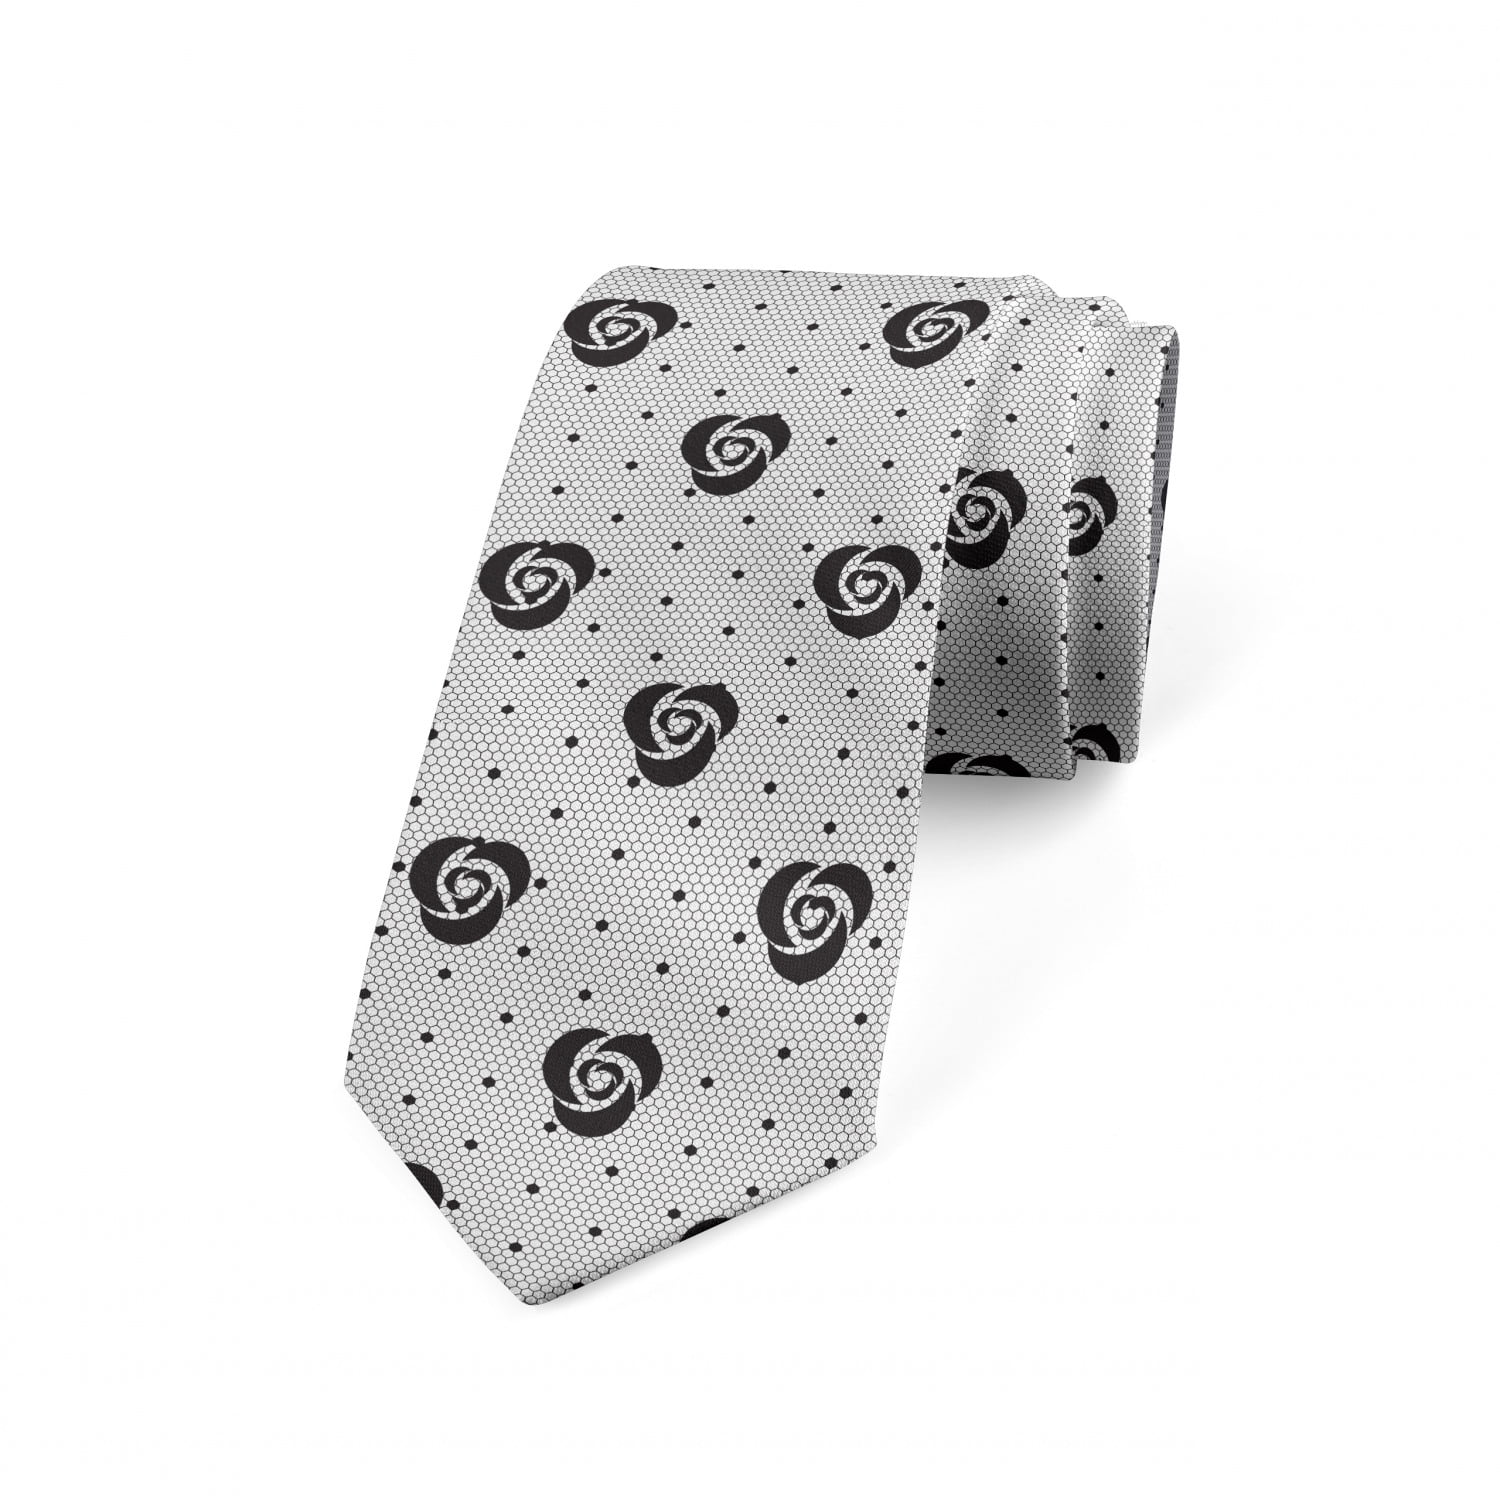 3.7 Charcoal Grey White Pink Contemporary Square Ambesonne Mens Tie